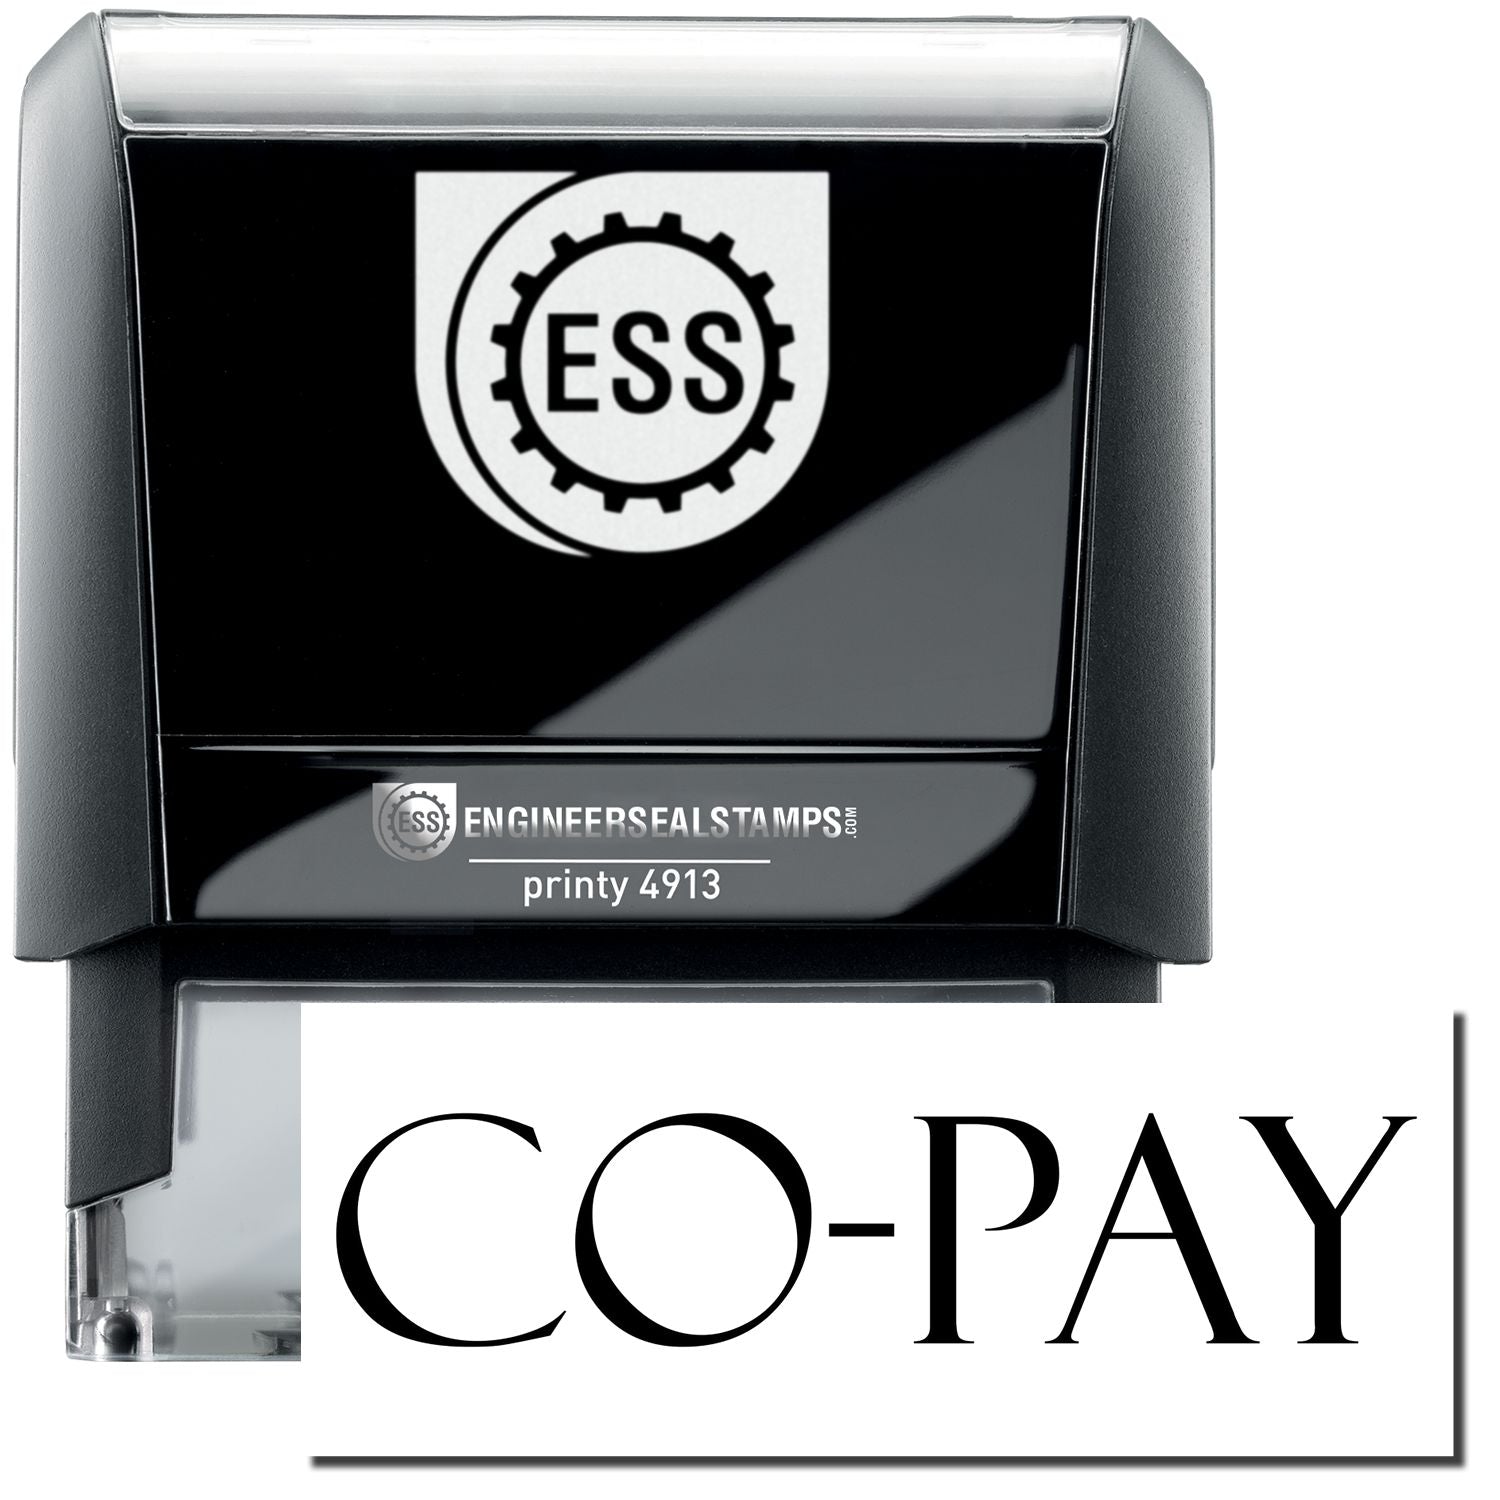 A self-inking stamp with a stamped image showing how the text "CO-PAY" in a large bold font is displayed by it.